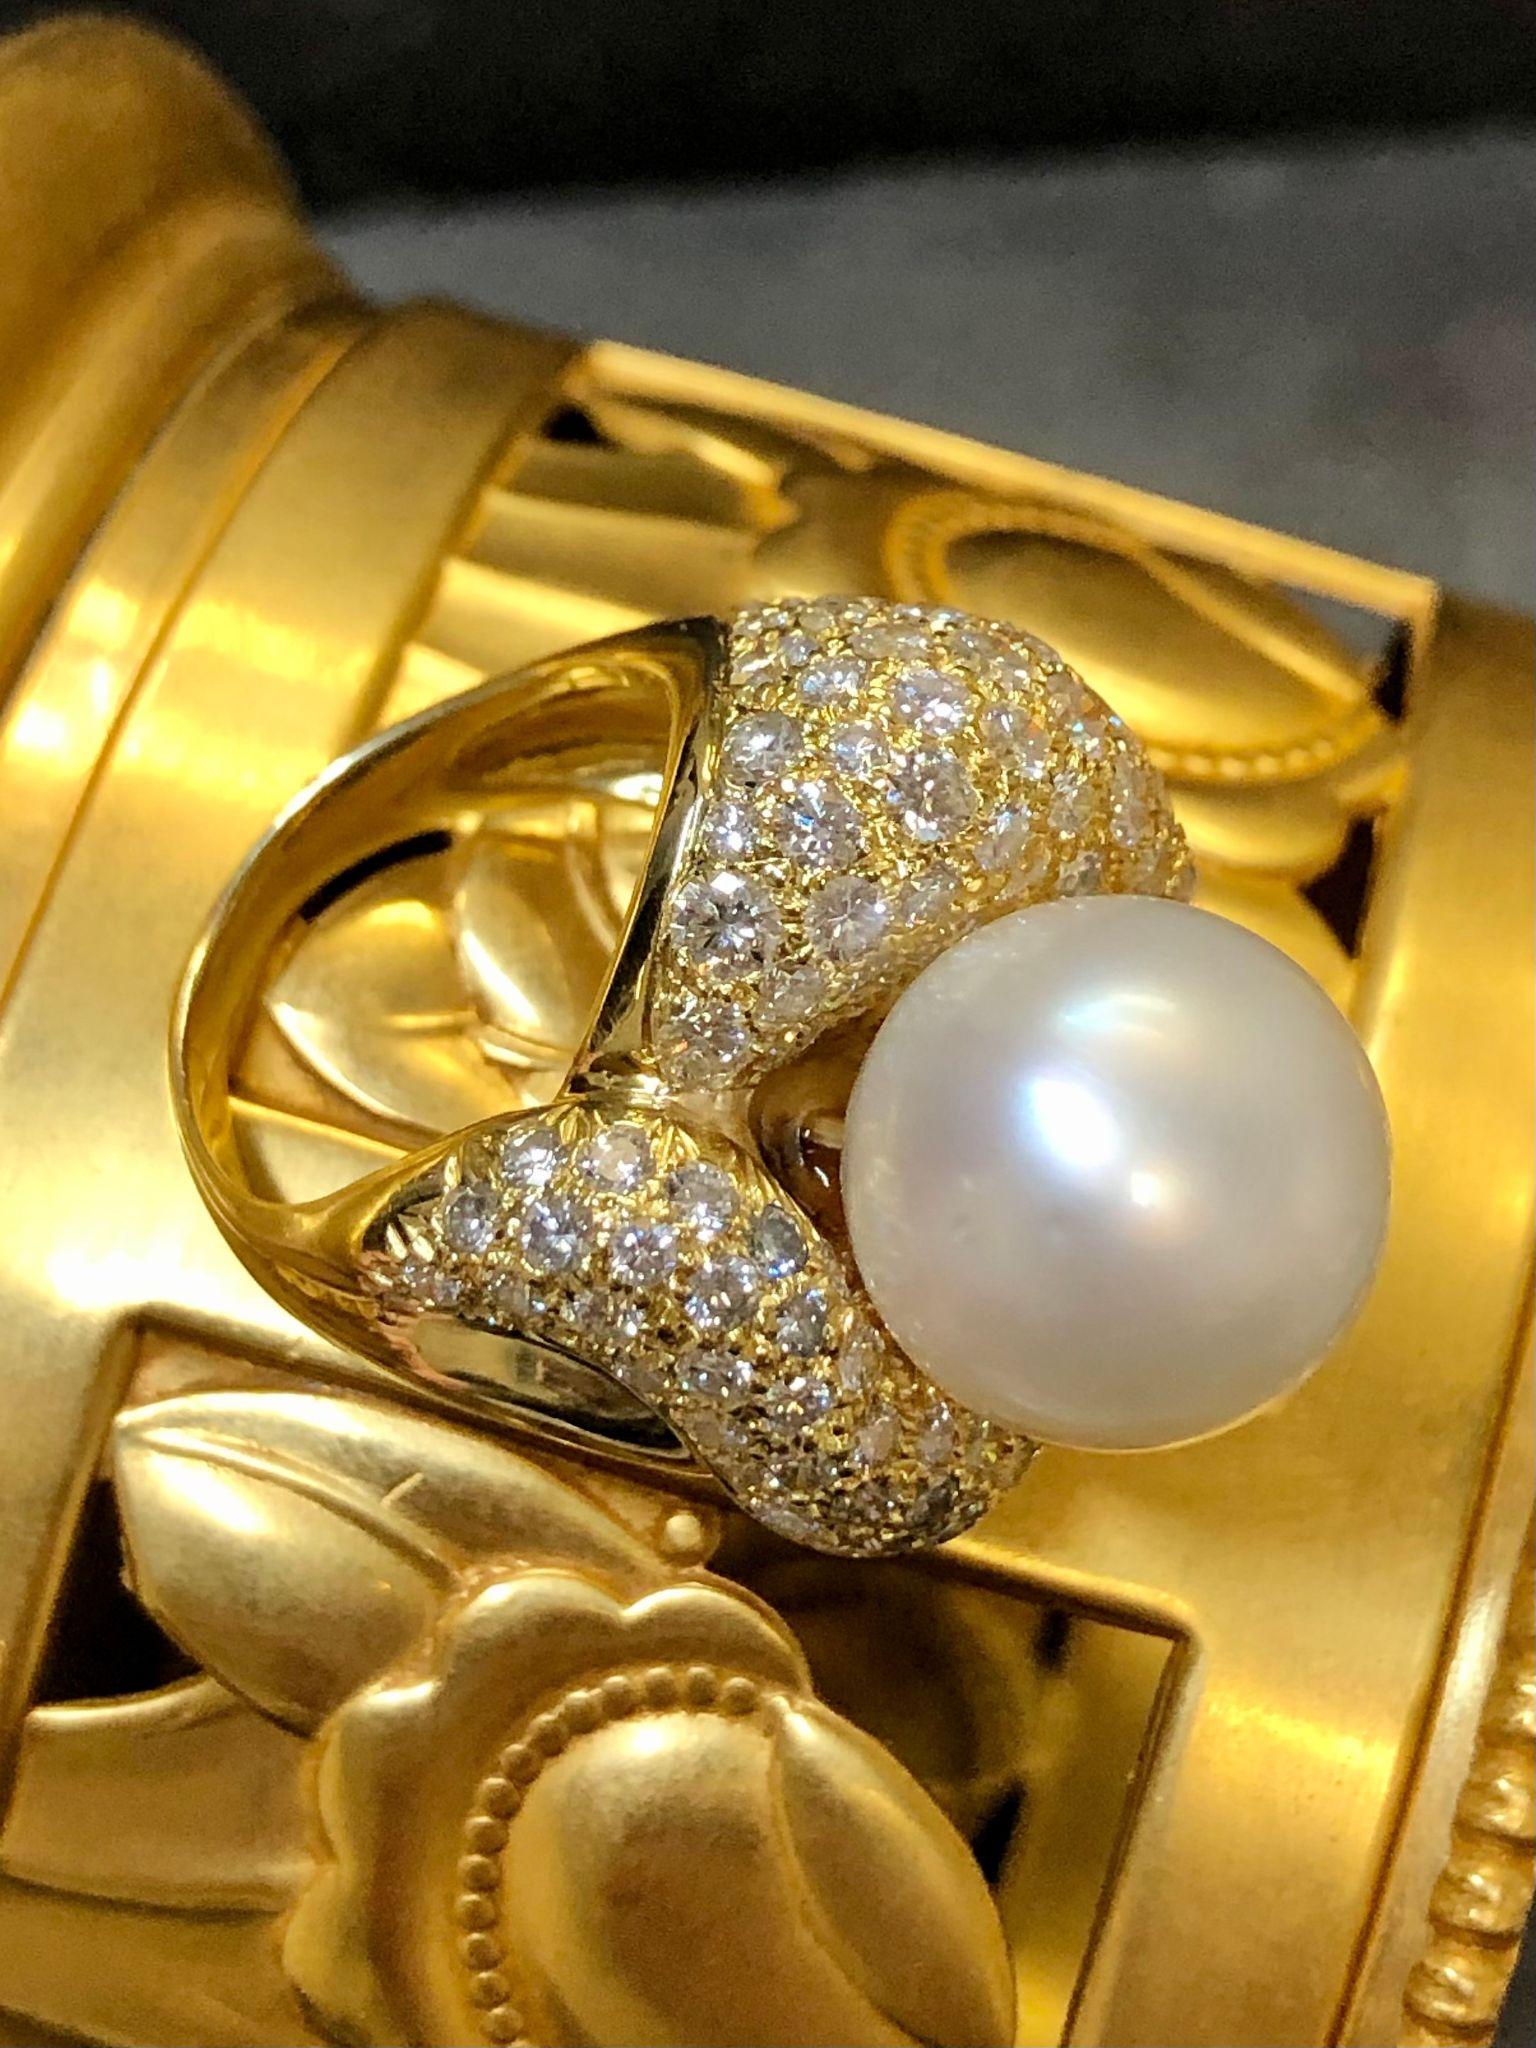 A vintage ring done in 18K yellow gold and set with a approximately 6cttw in F-G color Vs1-2 clarity diamonds and topped with a 13.2mm cream colored South Sea pearl.

Dimensions/Weight
1” wide by .75” top to bottom. Size 5 1/4” (sizable). Weighs